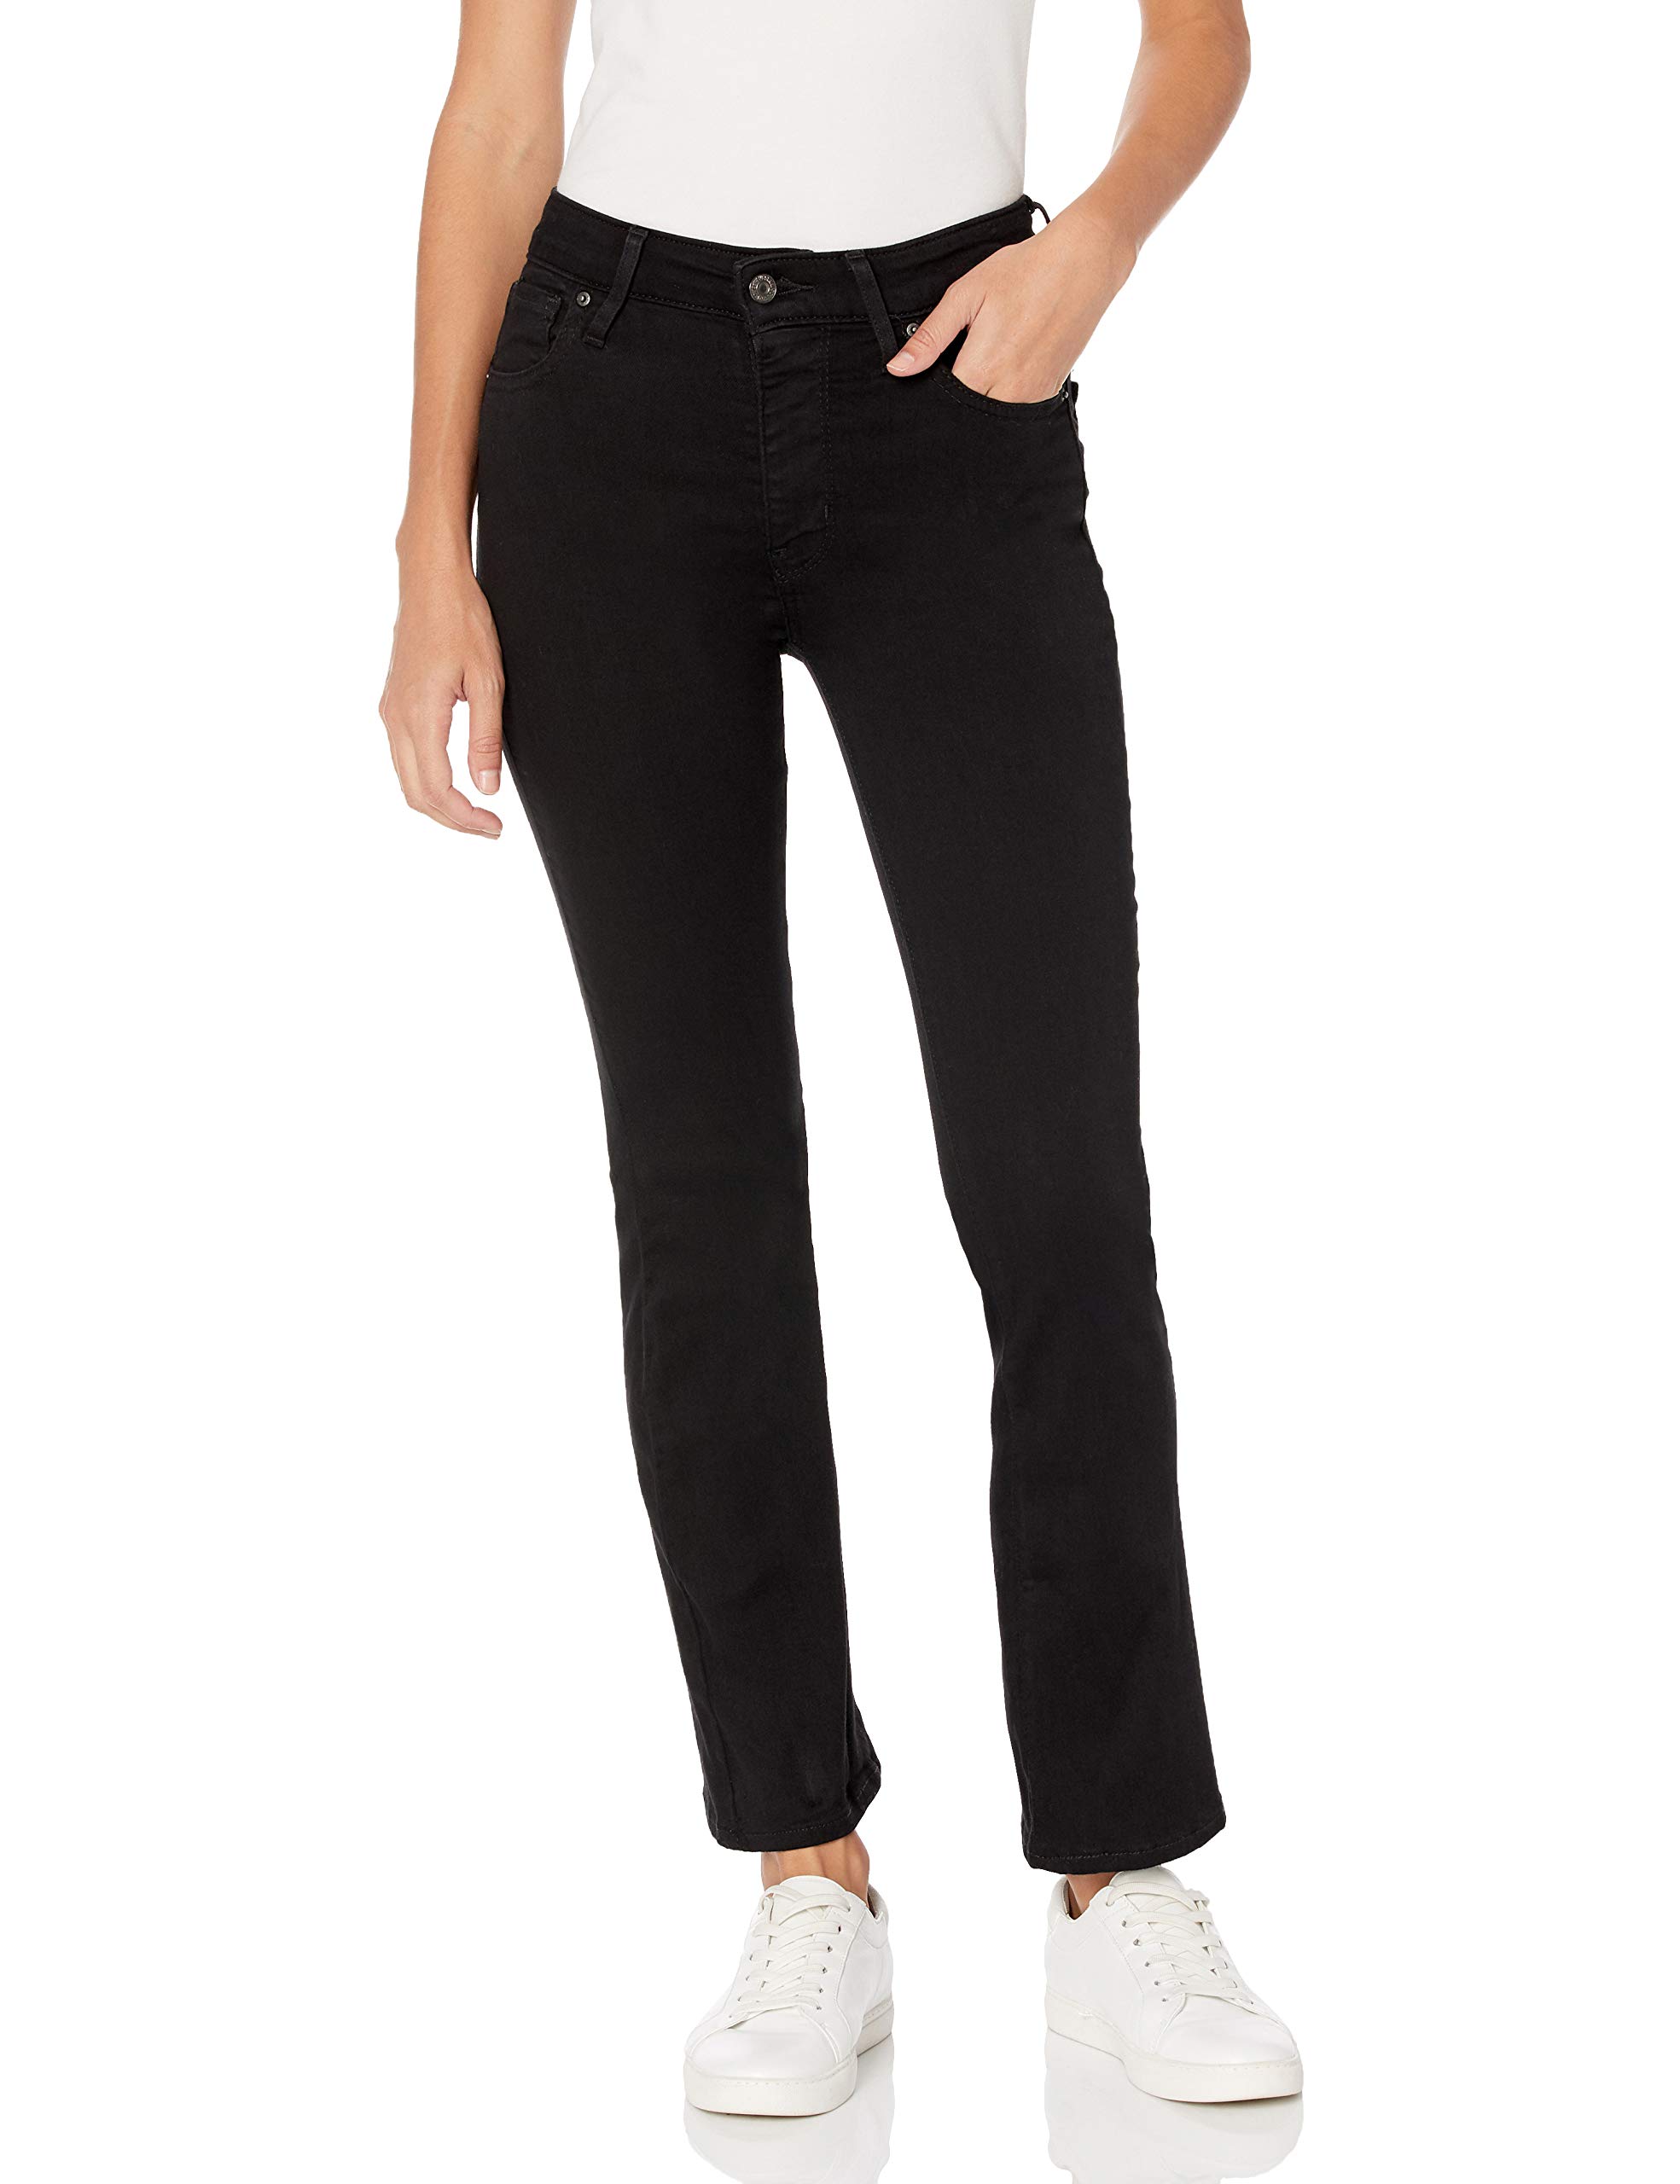 Levi's Women's 725 High Rise Bootcut Jeans (Soft Black) $26 + Free Shipping